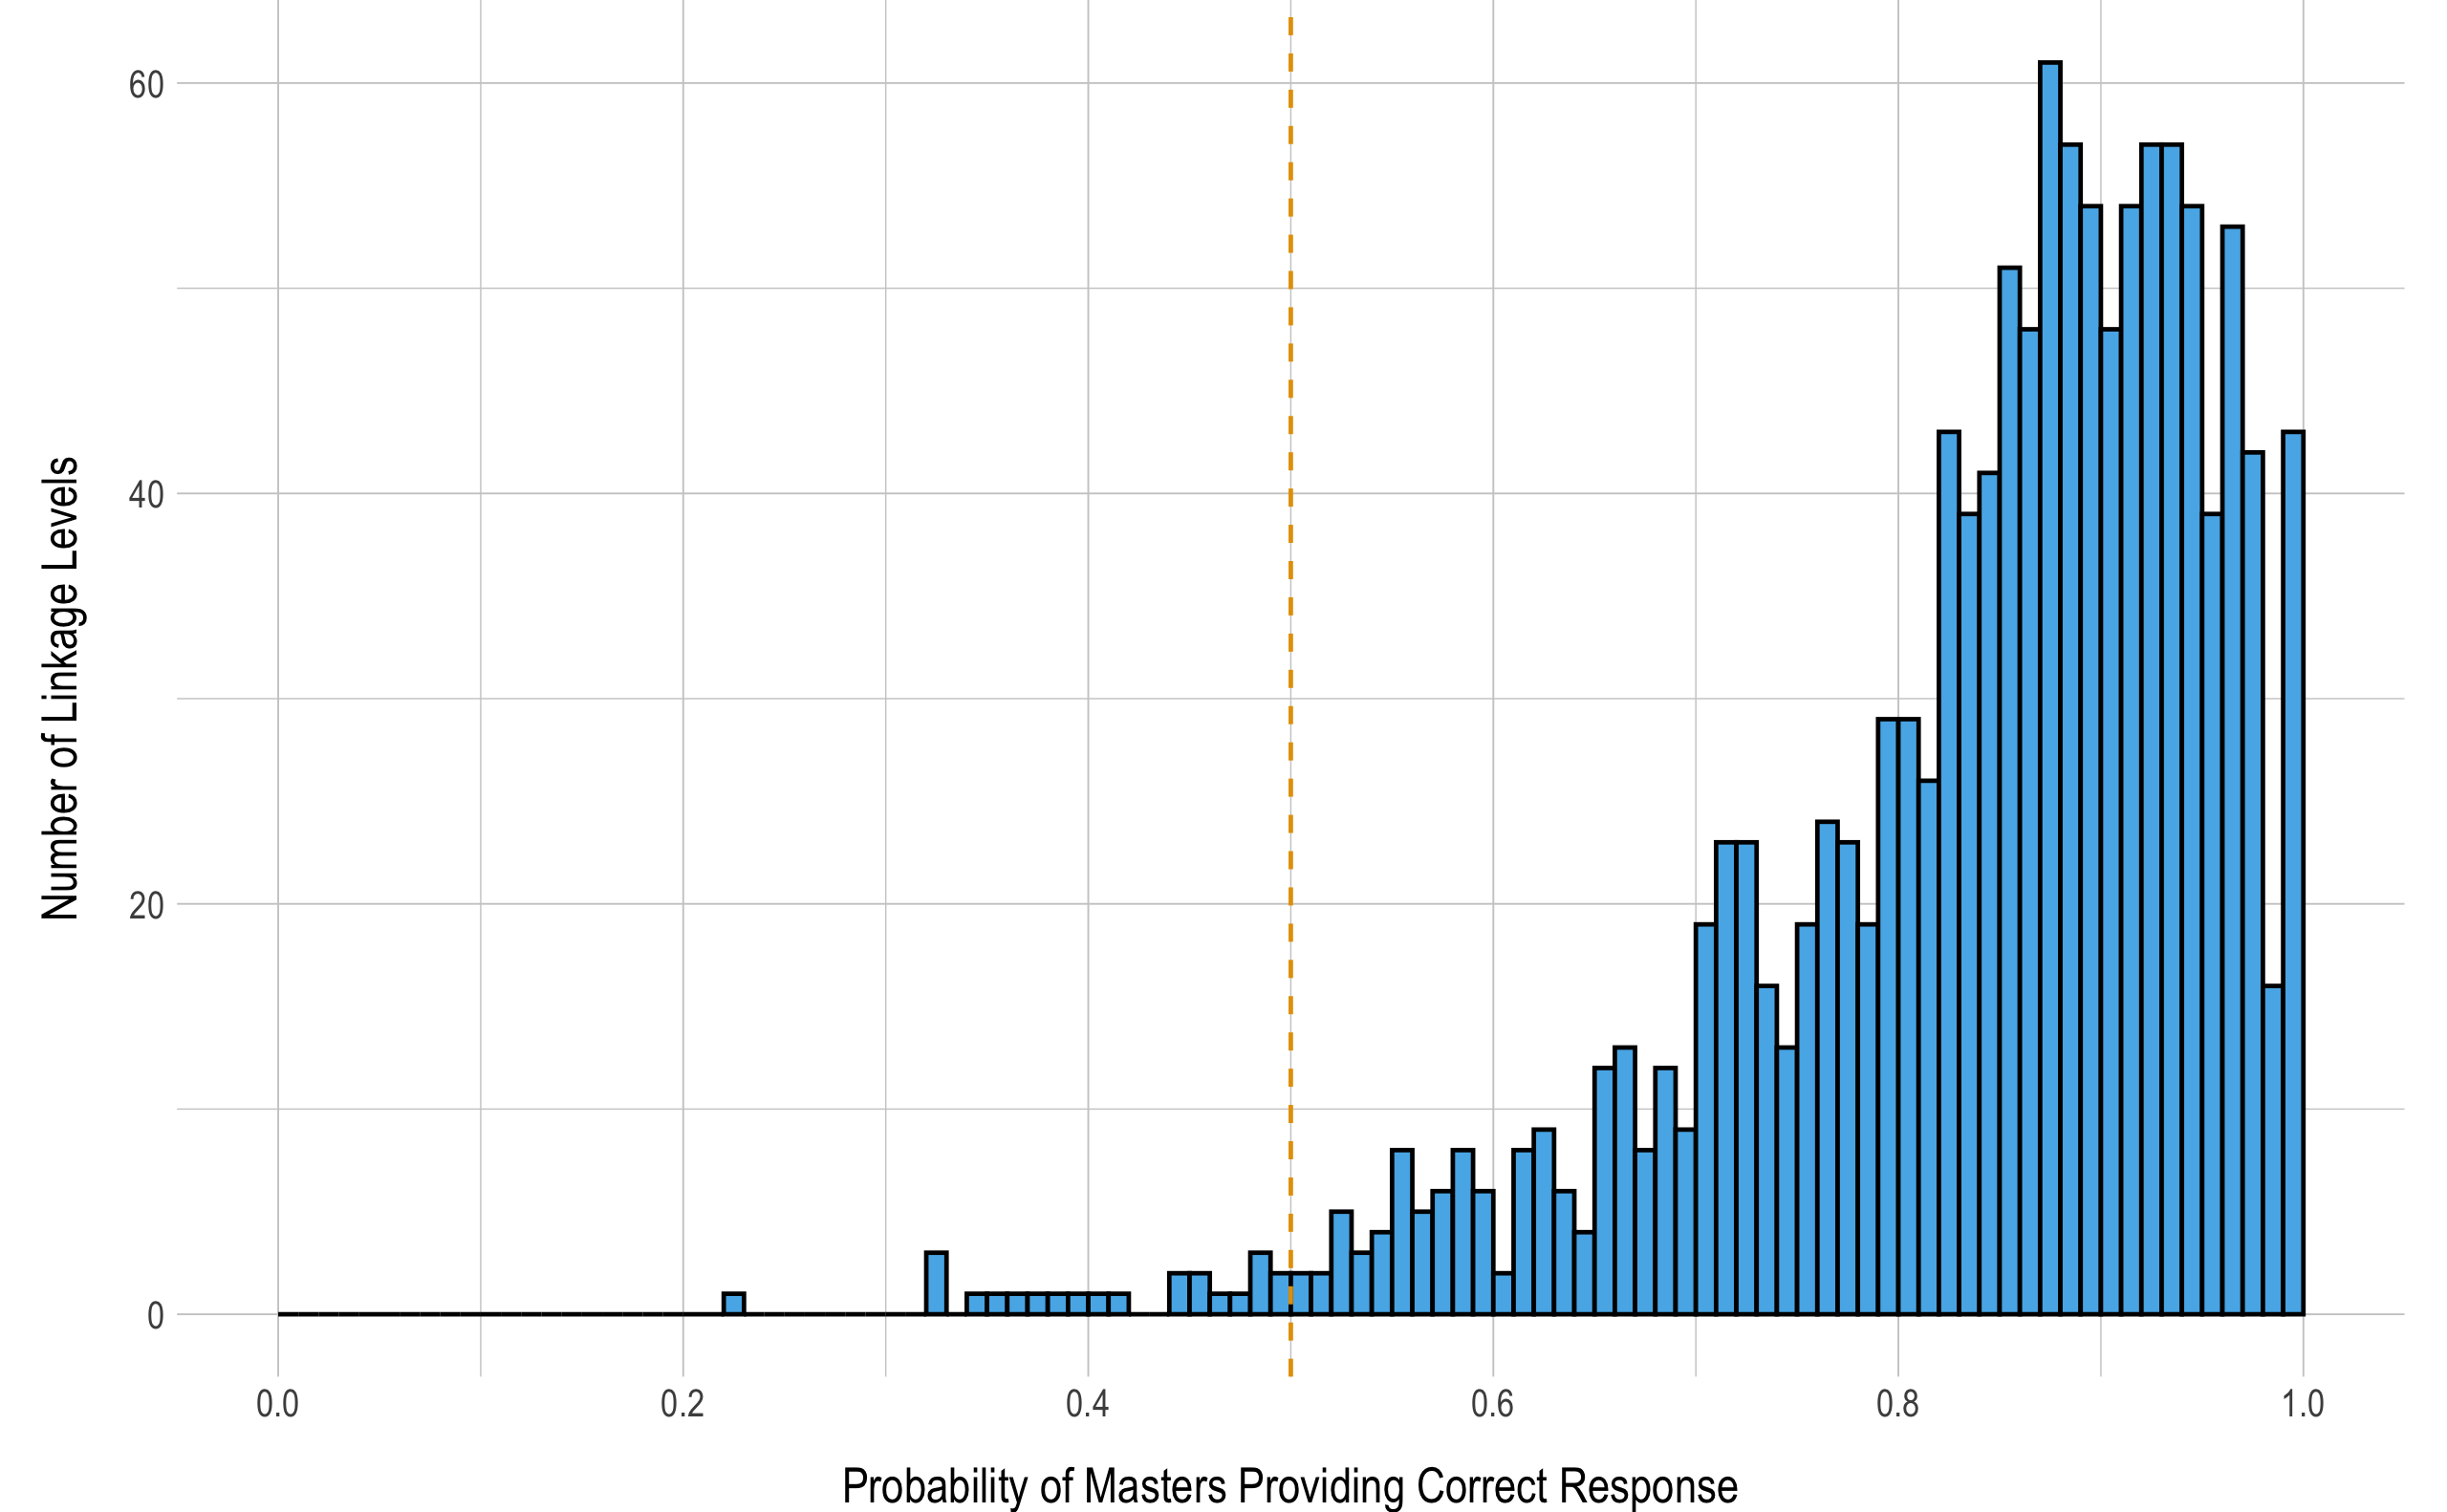 Probability of Masters Providing a Correct Response to Items Measuring Each Linkage Level